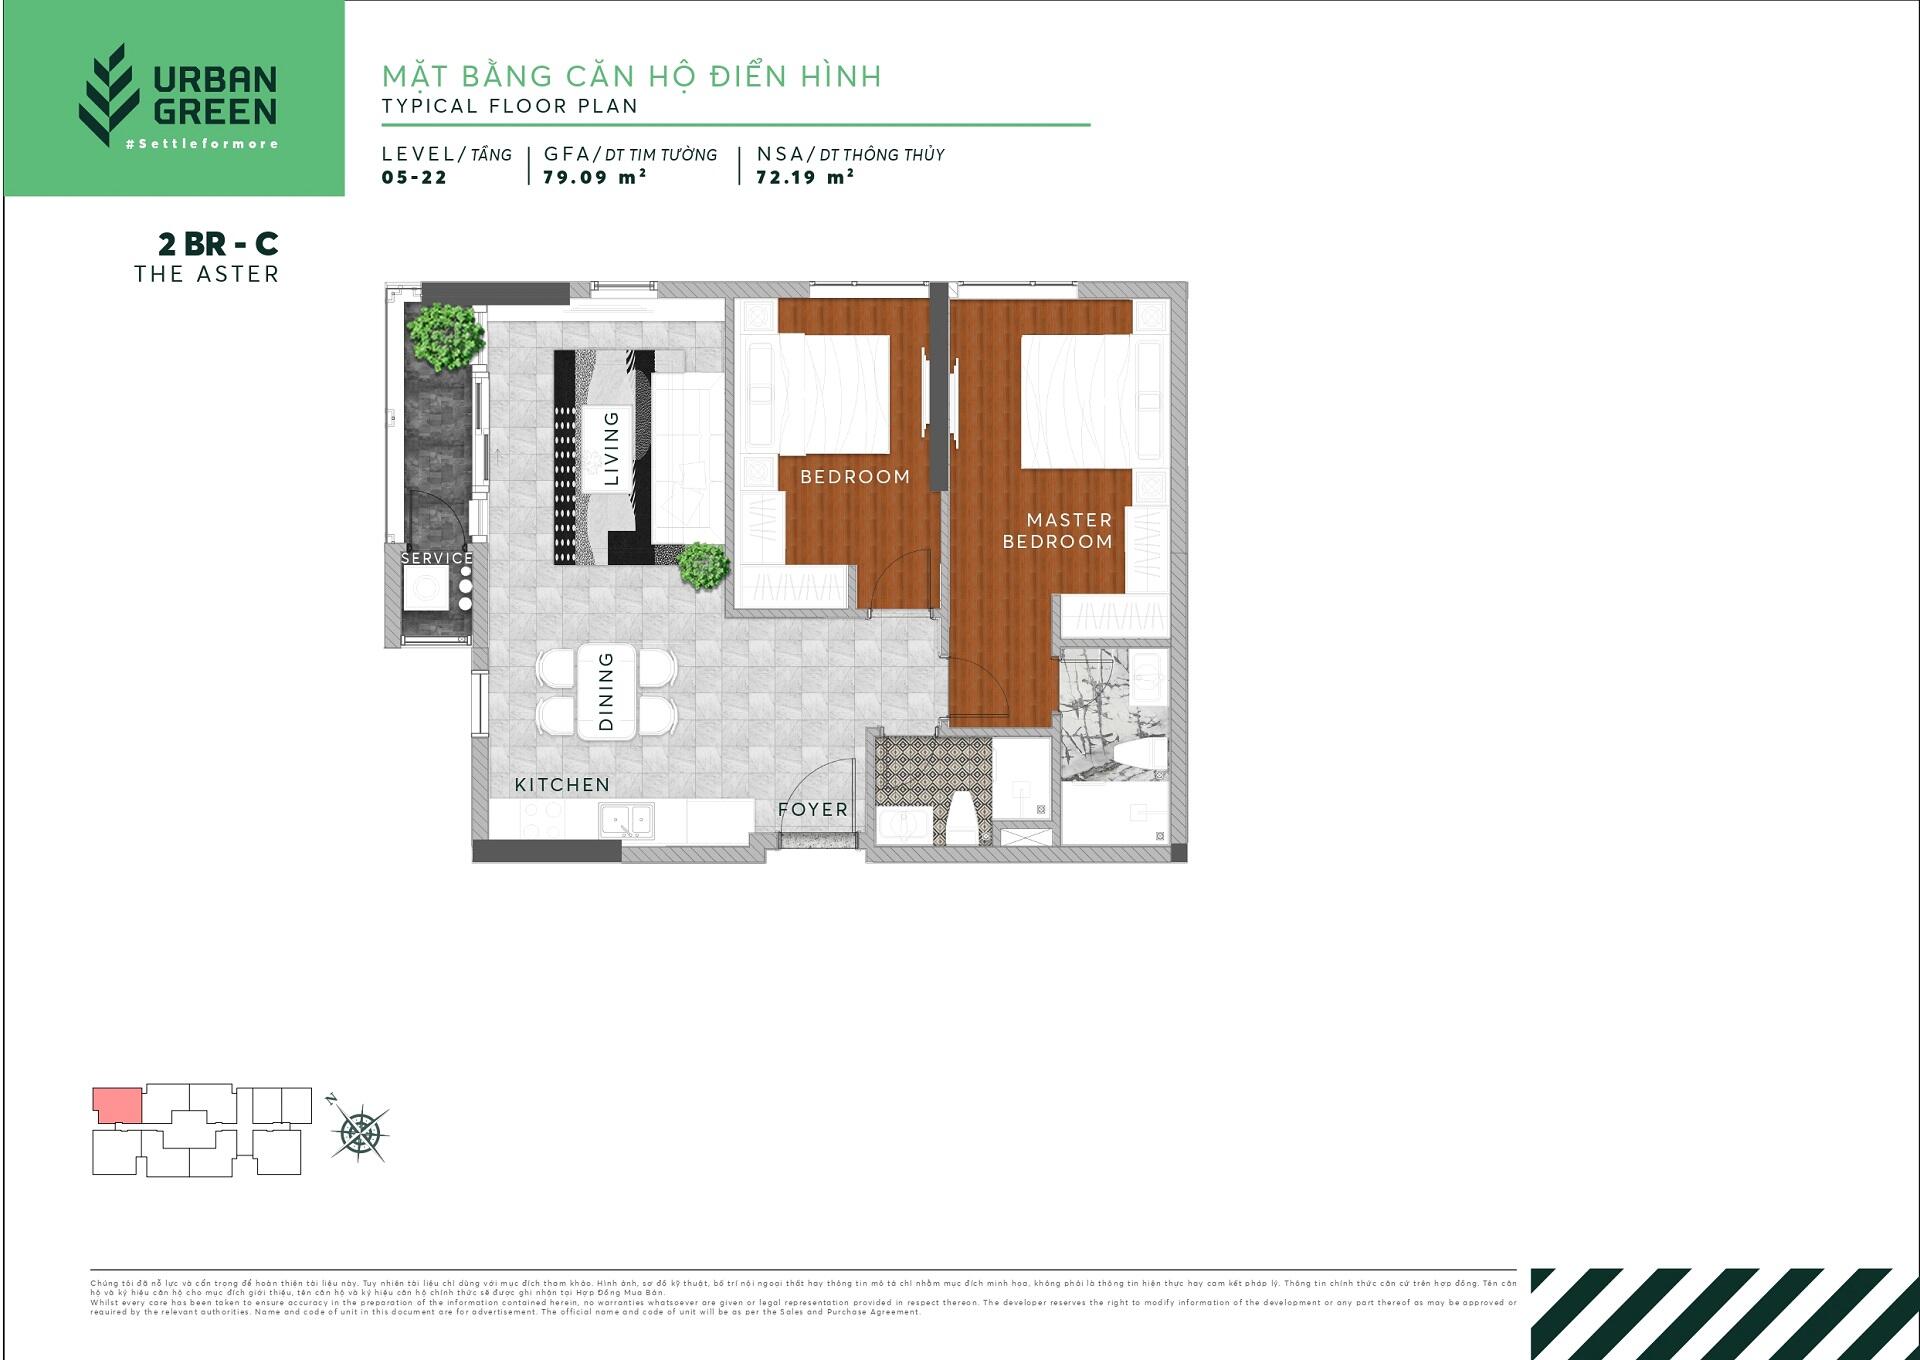 The layout of The Aster apartment 2 bedrooms 2BR - C